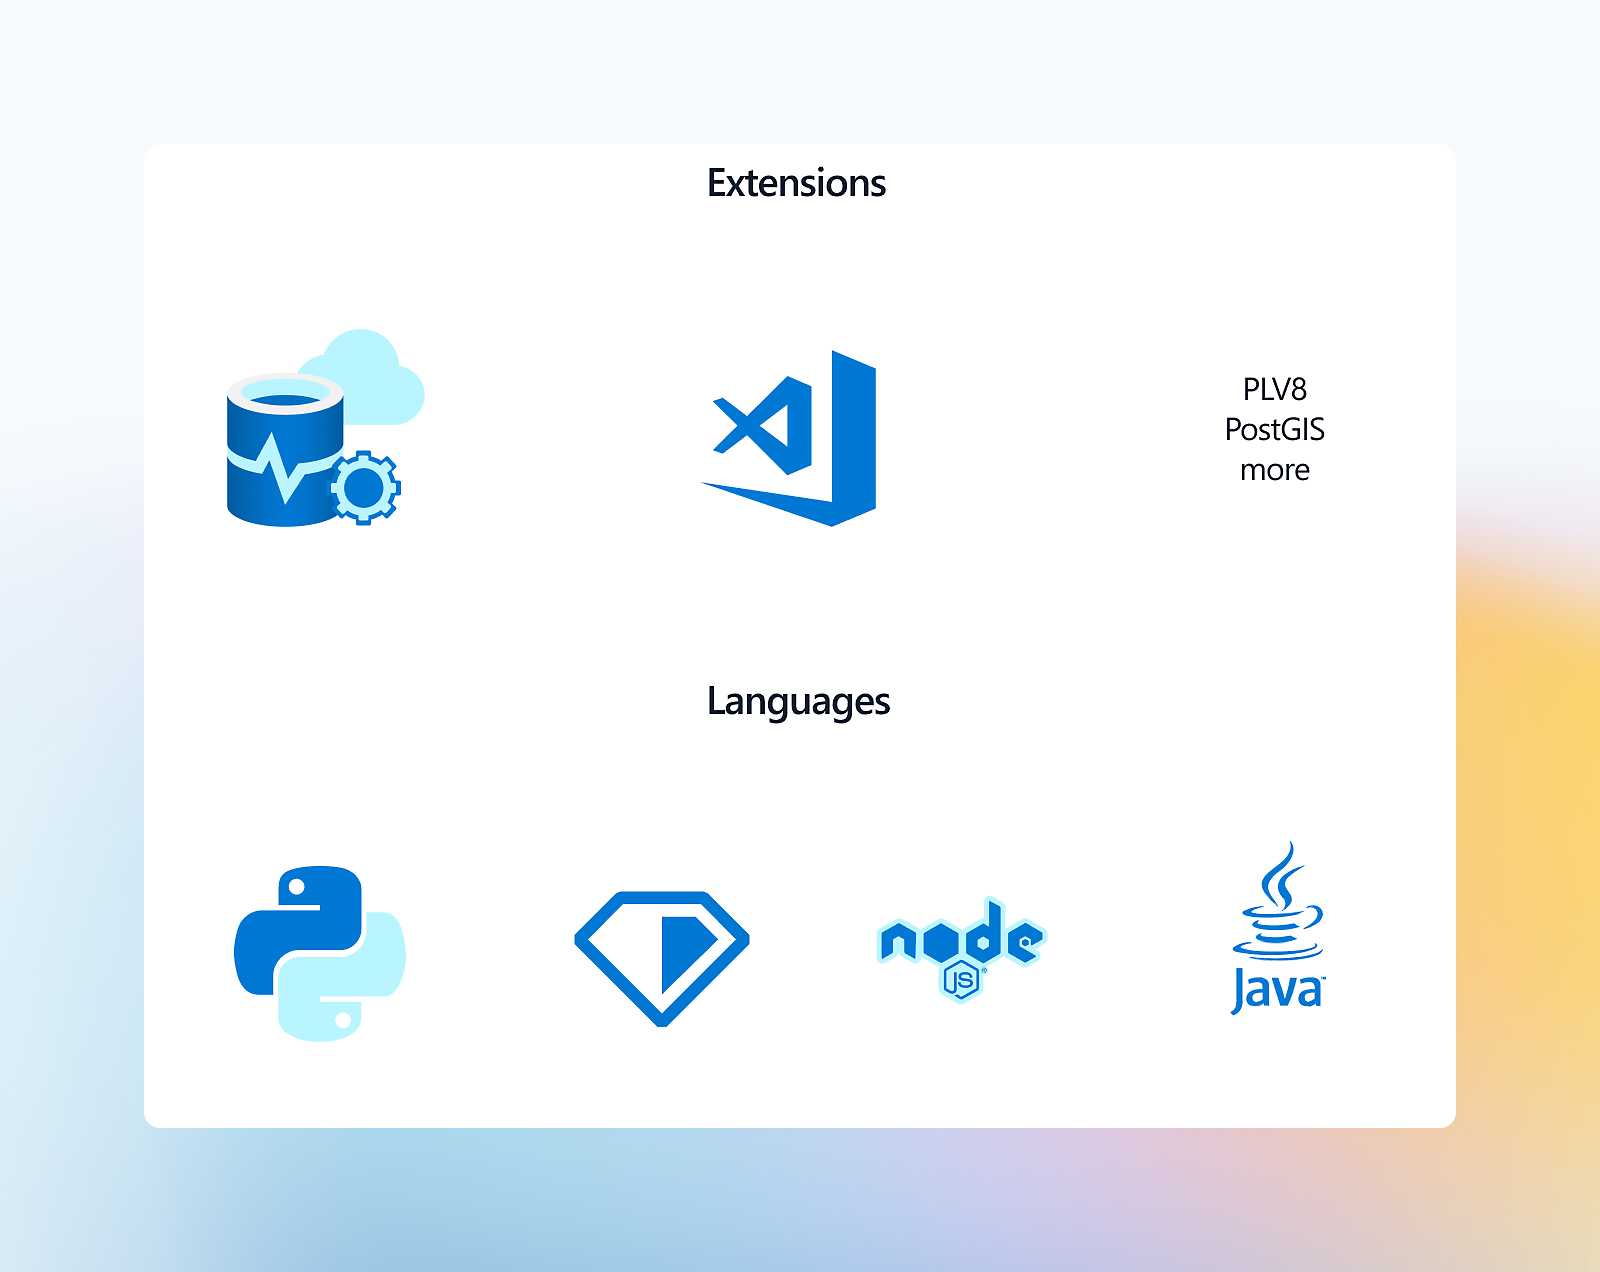 Graphic showing two sections labeled "extensions" and "languages" with icons for cloud services